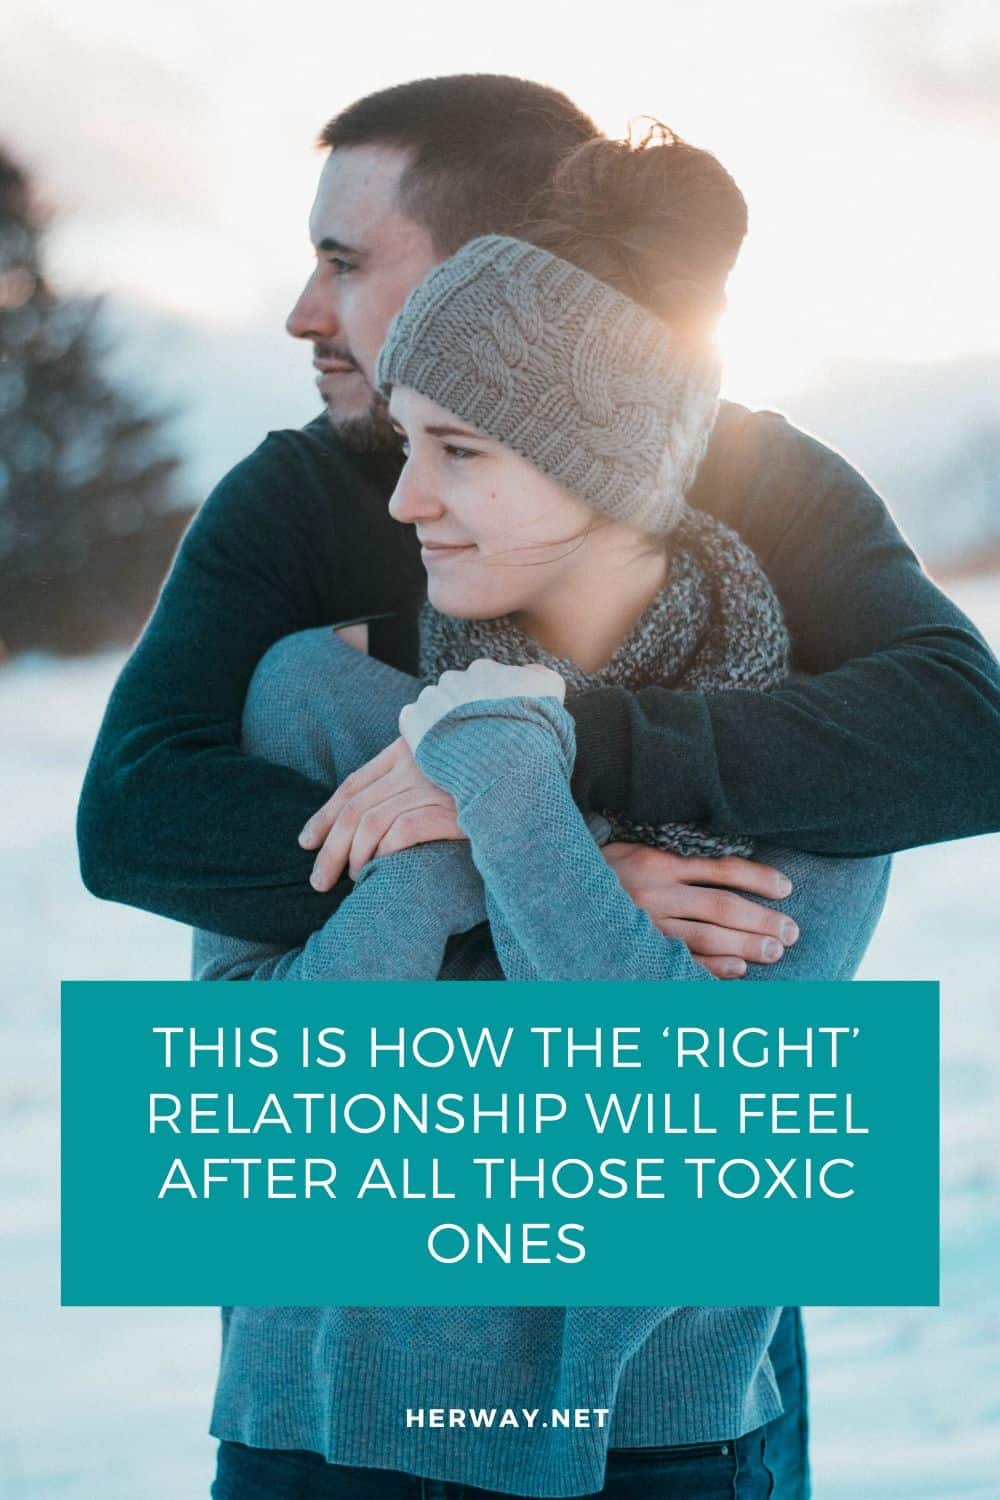 THIS IS HOW THE ‘RIGHT’ RELATIONSHIP WILL FEEL AFTER ALL THOSE TOXIC ONES